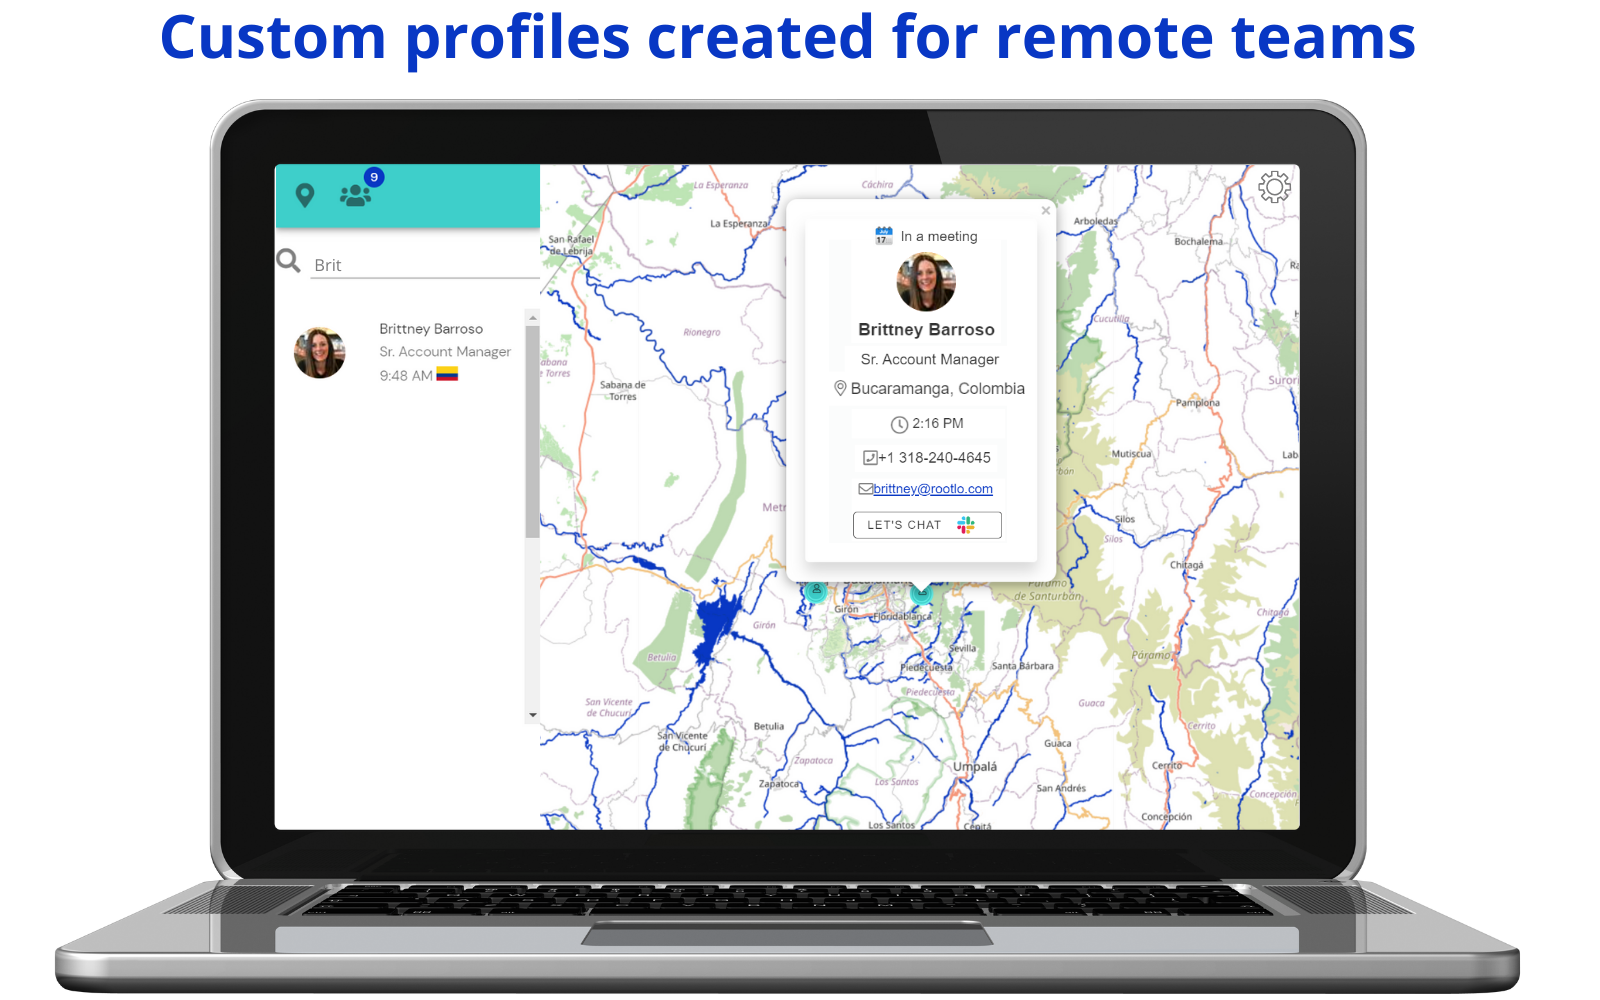 With employee profiles built for remote teams, getting in touch with colleagues is just one-click away!